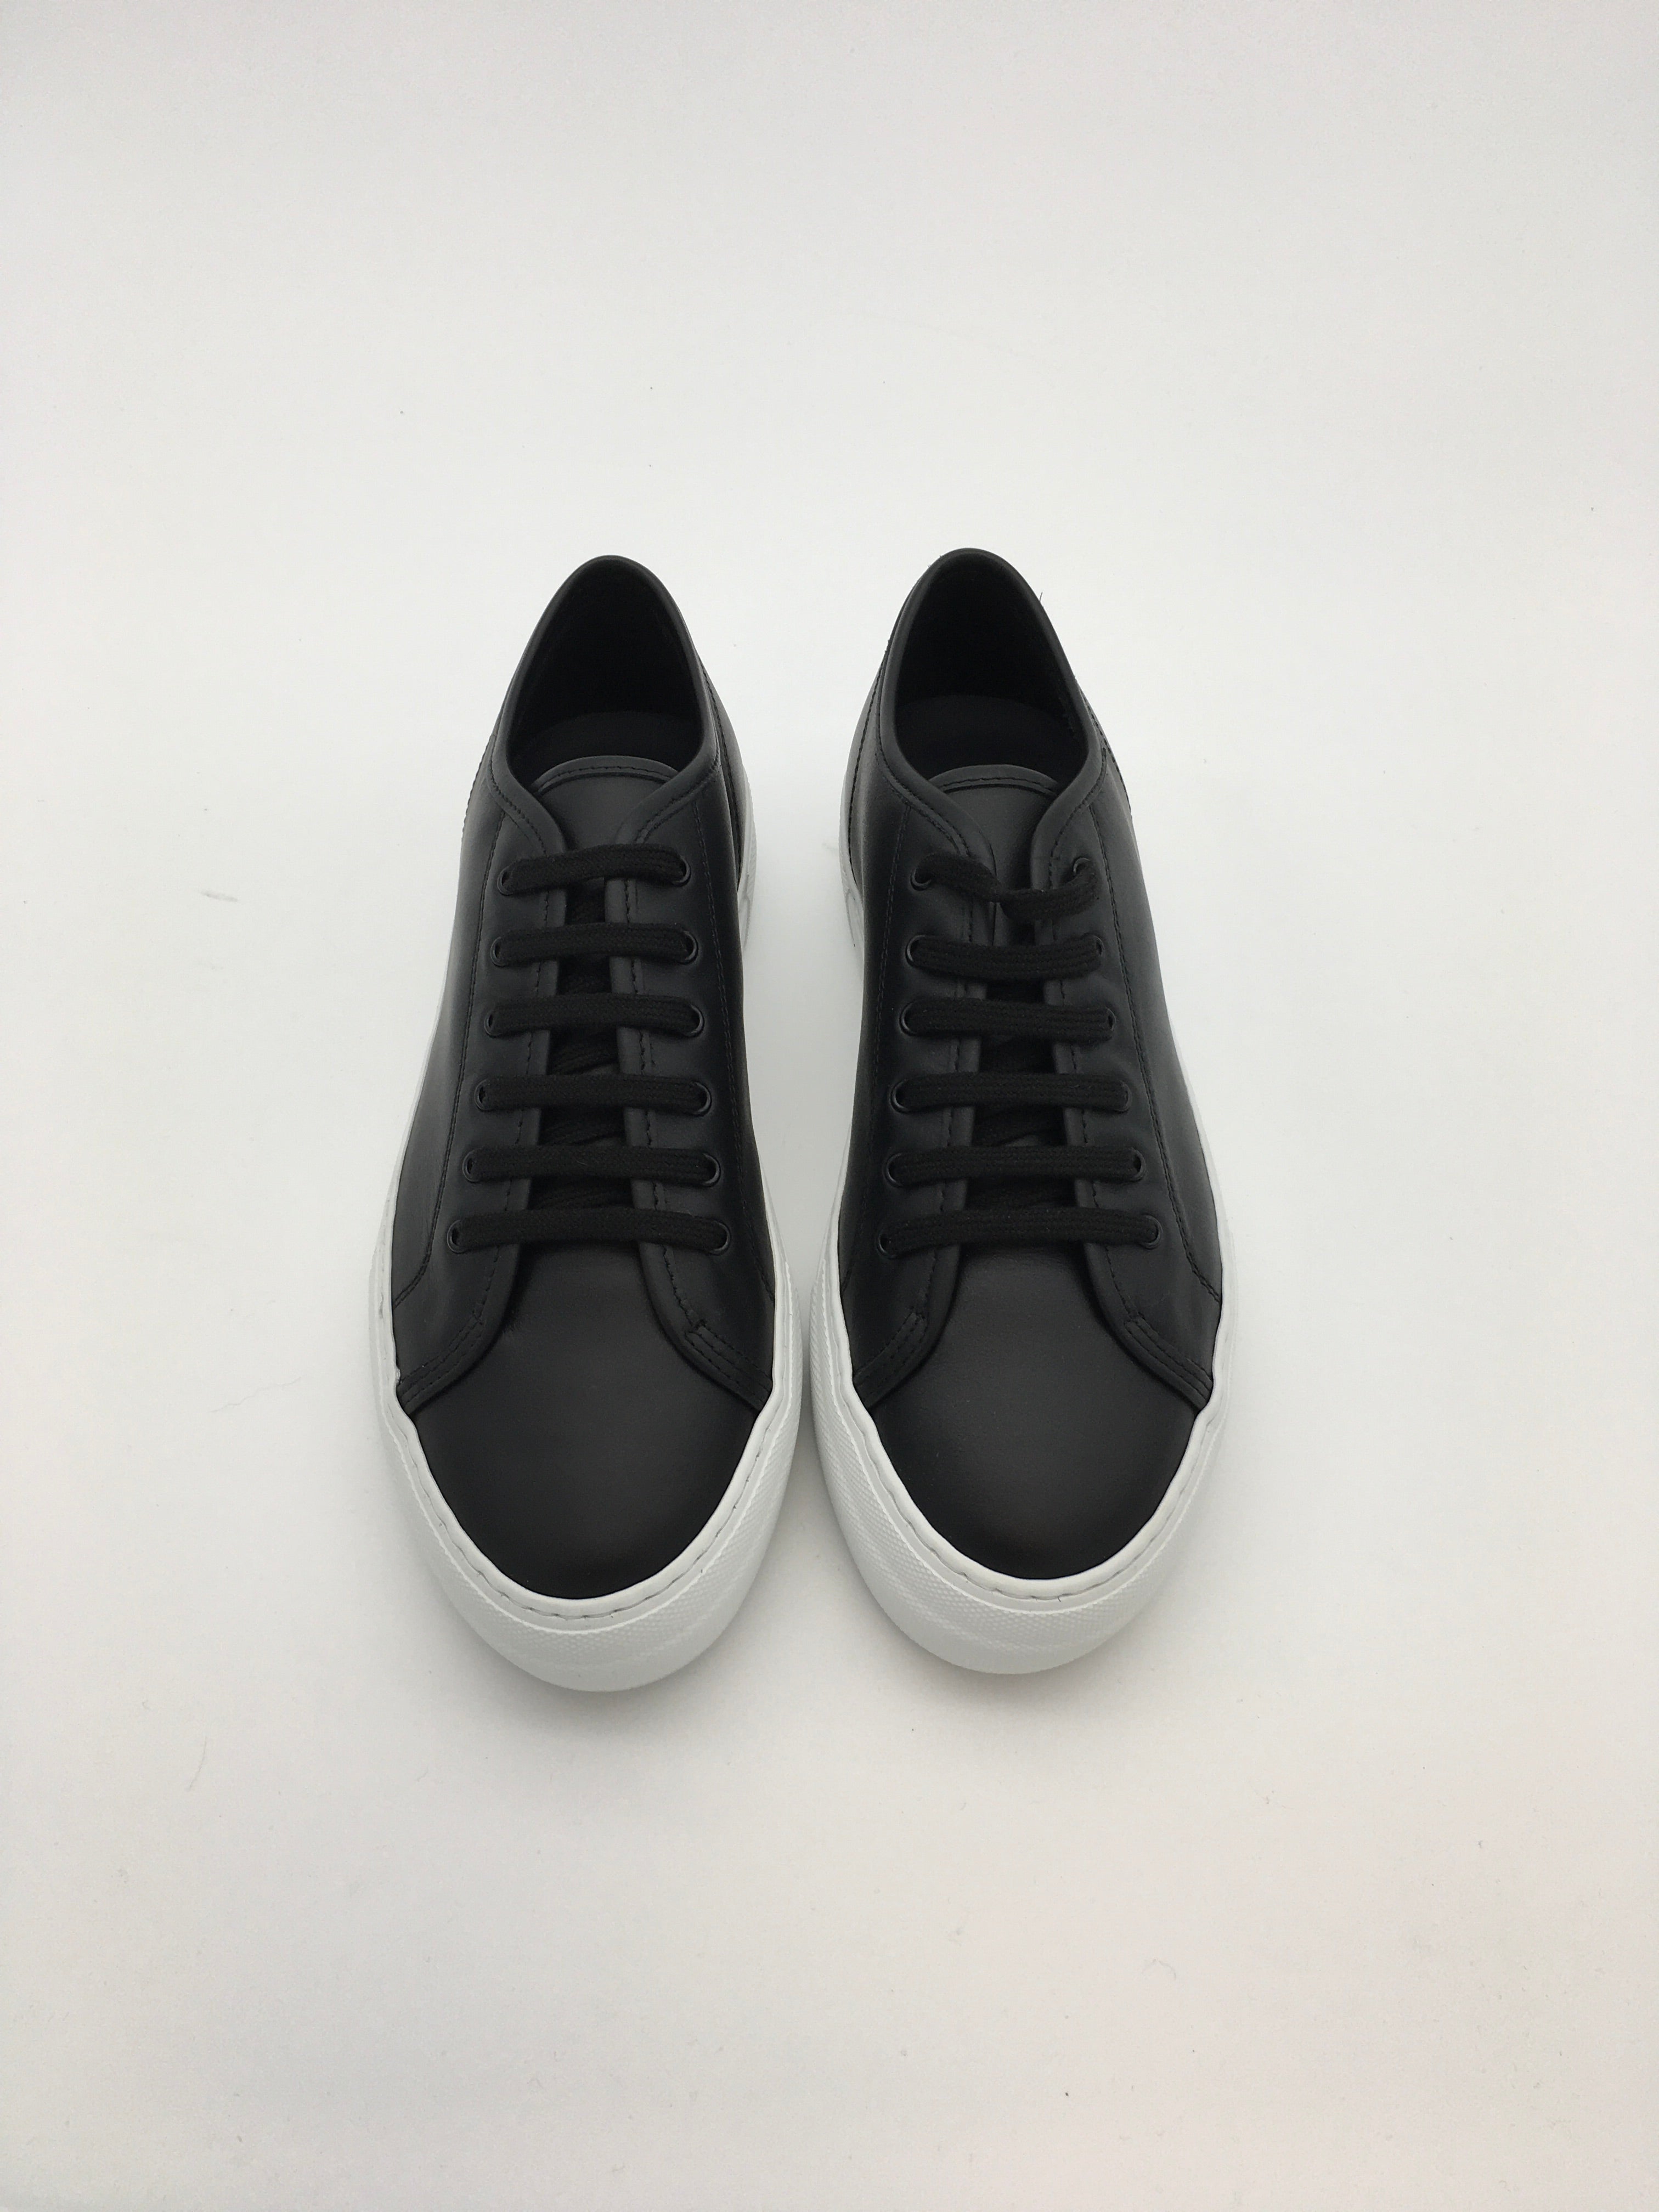 Common Projects TOURNAMENT LOW Sneakers - Size 6.5